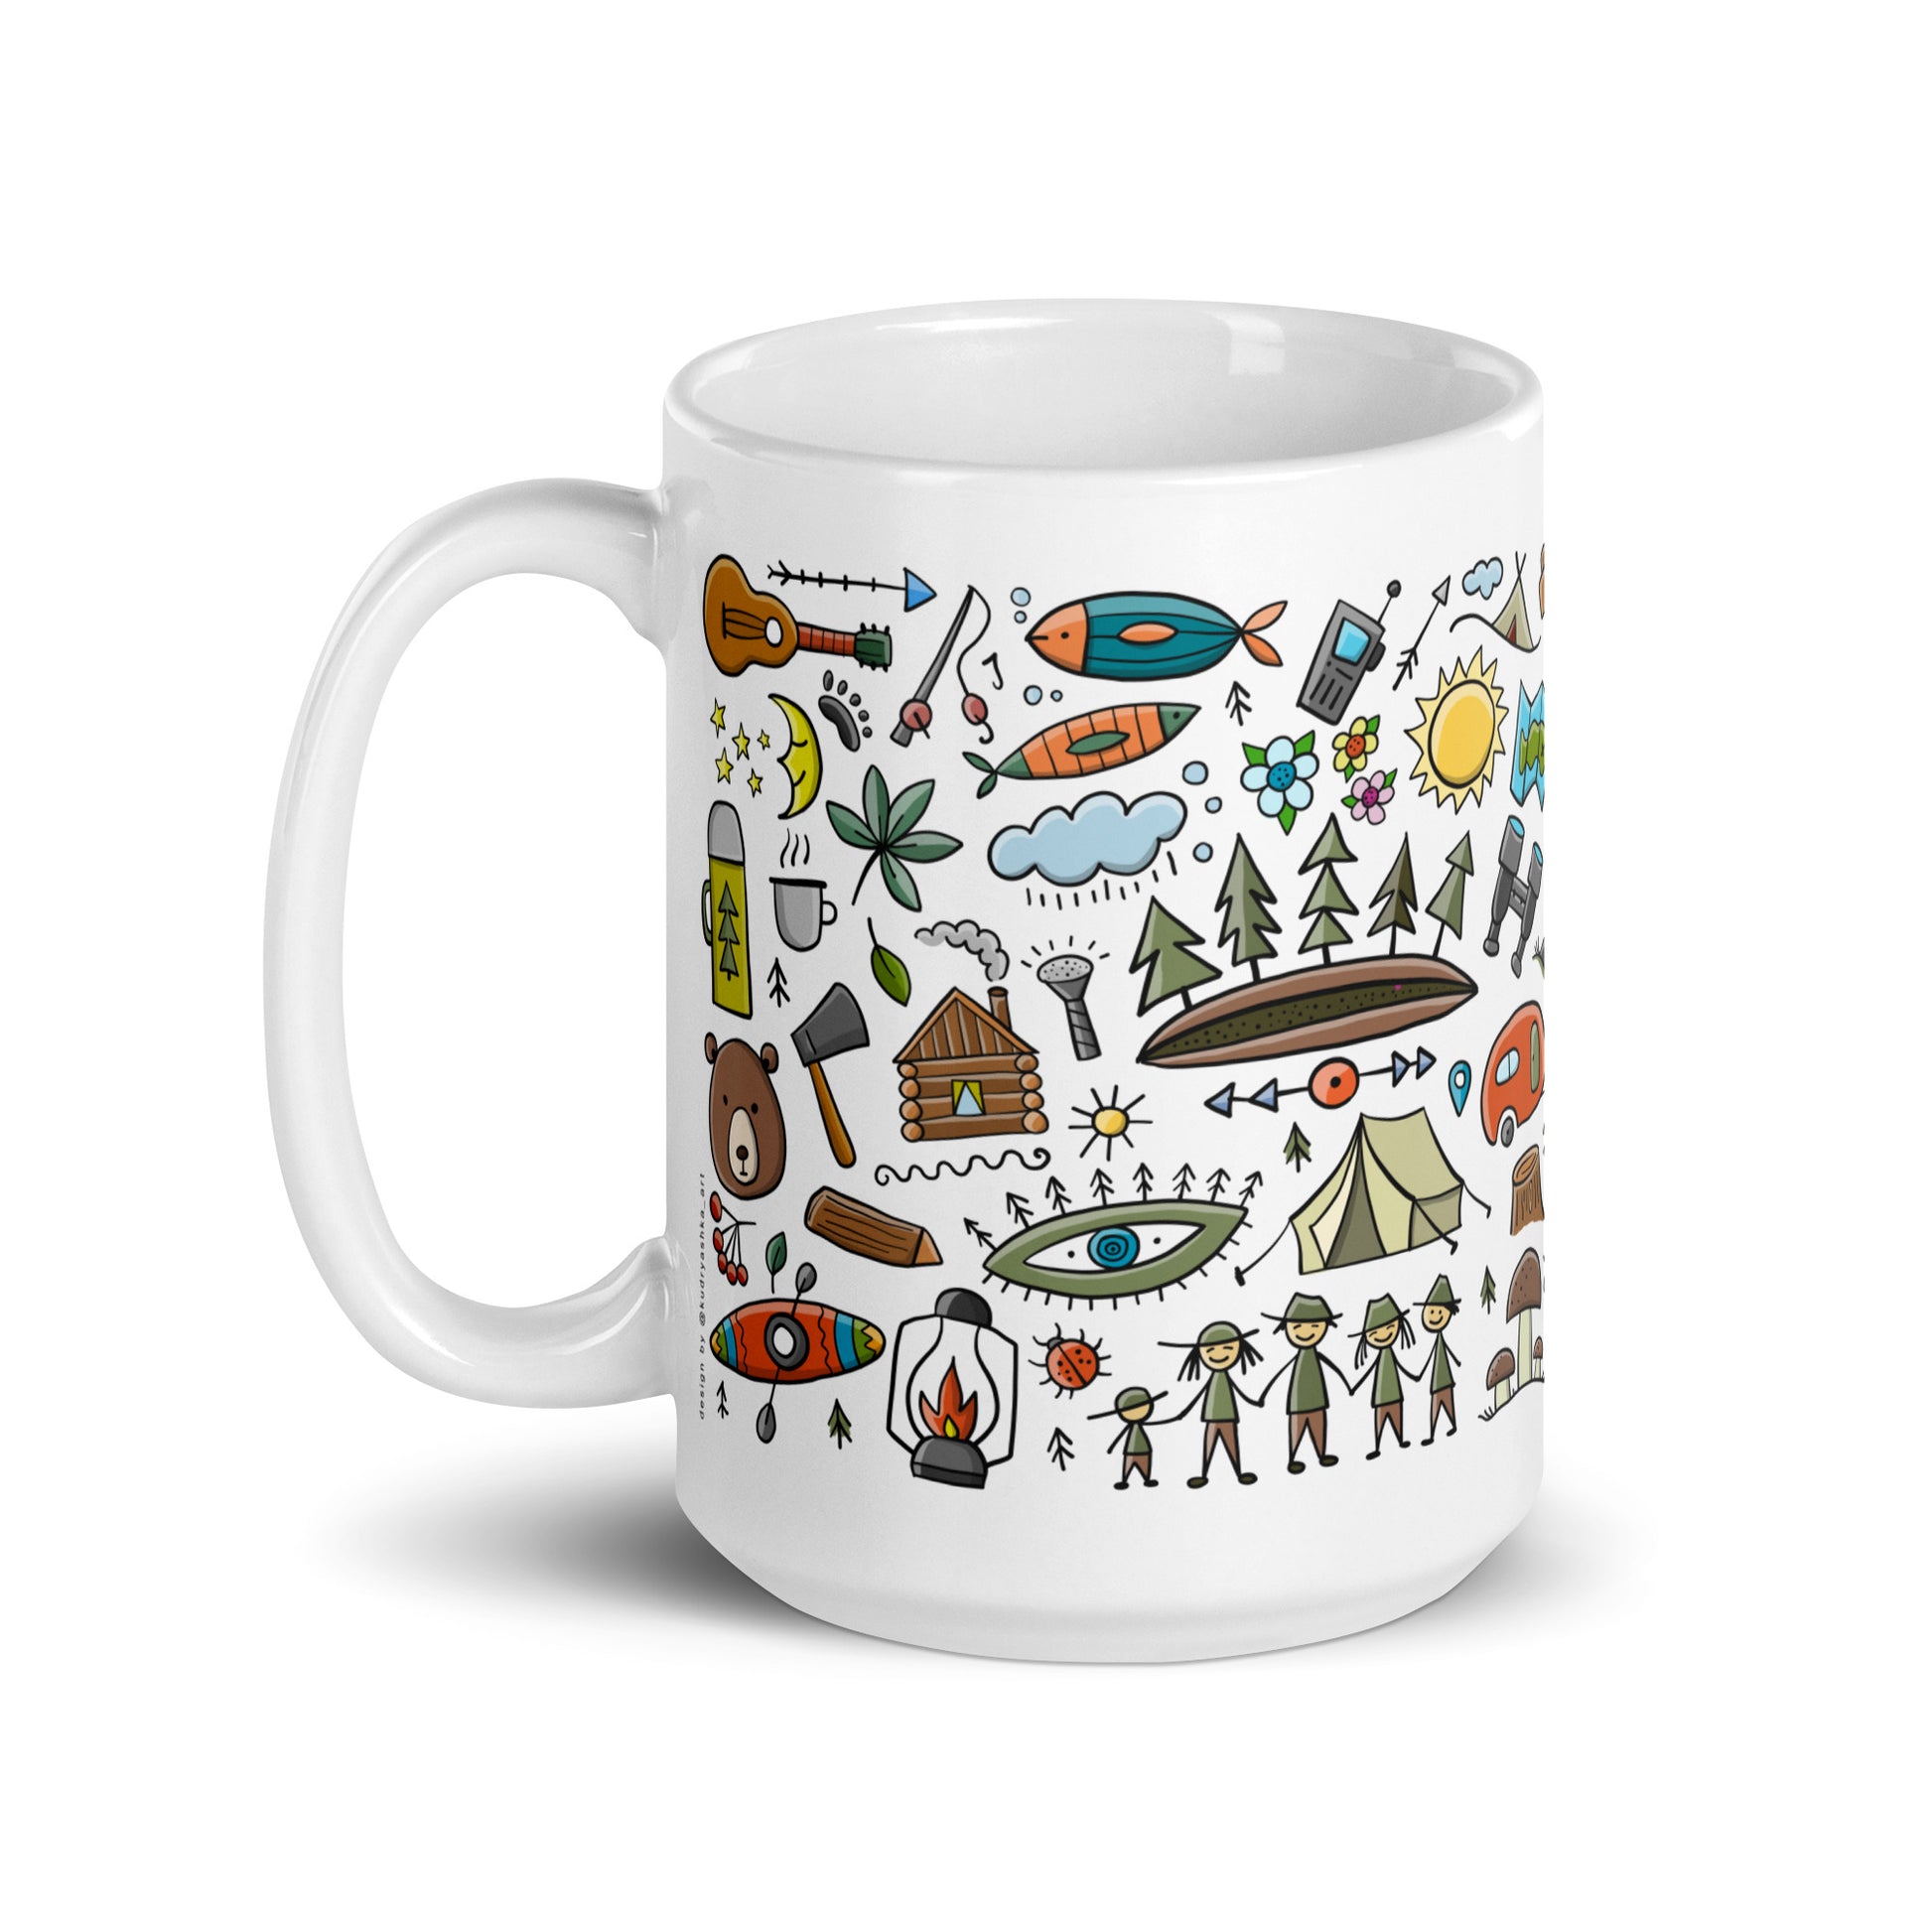 15 oz gift ceramic mug for camping and nature lovers. Basic text on mug: Camping therapy. Coffee in the Great Outdoors. The main text on the mug can be replaced for your own. Back side